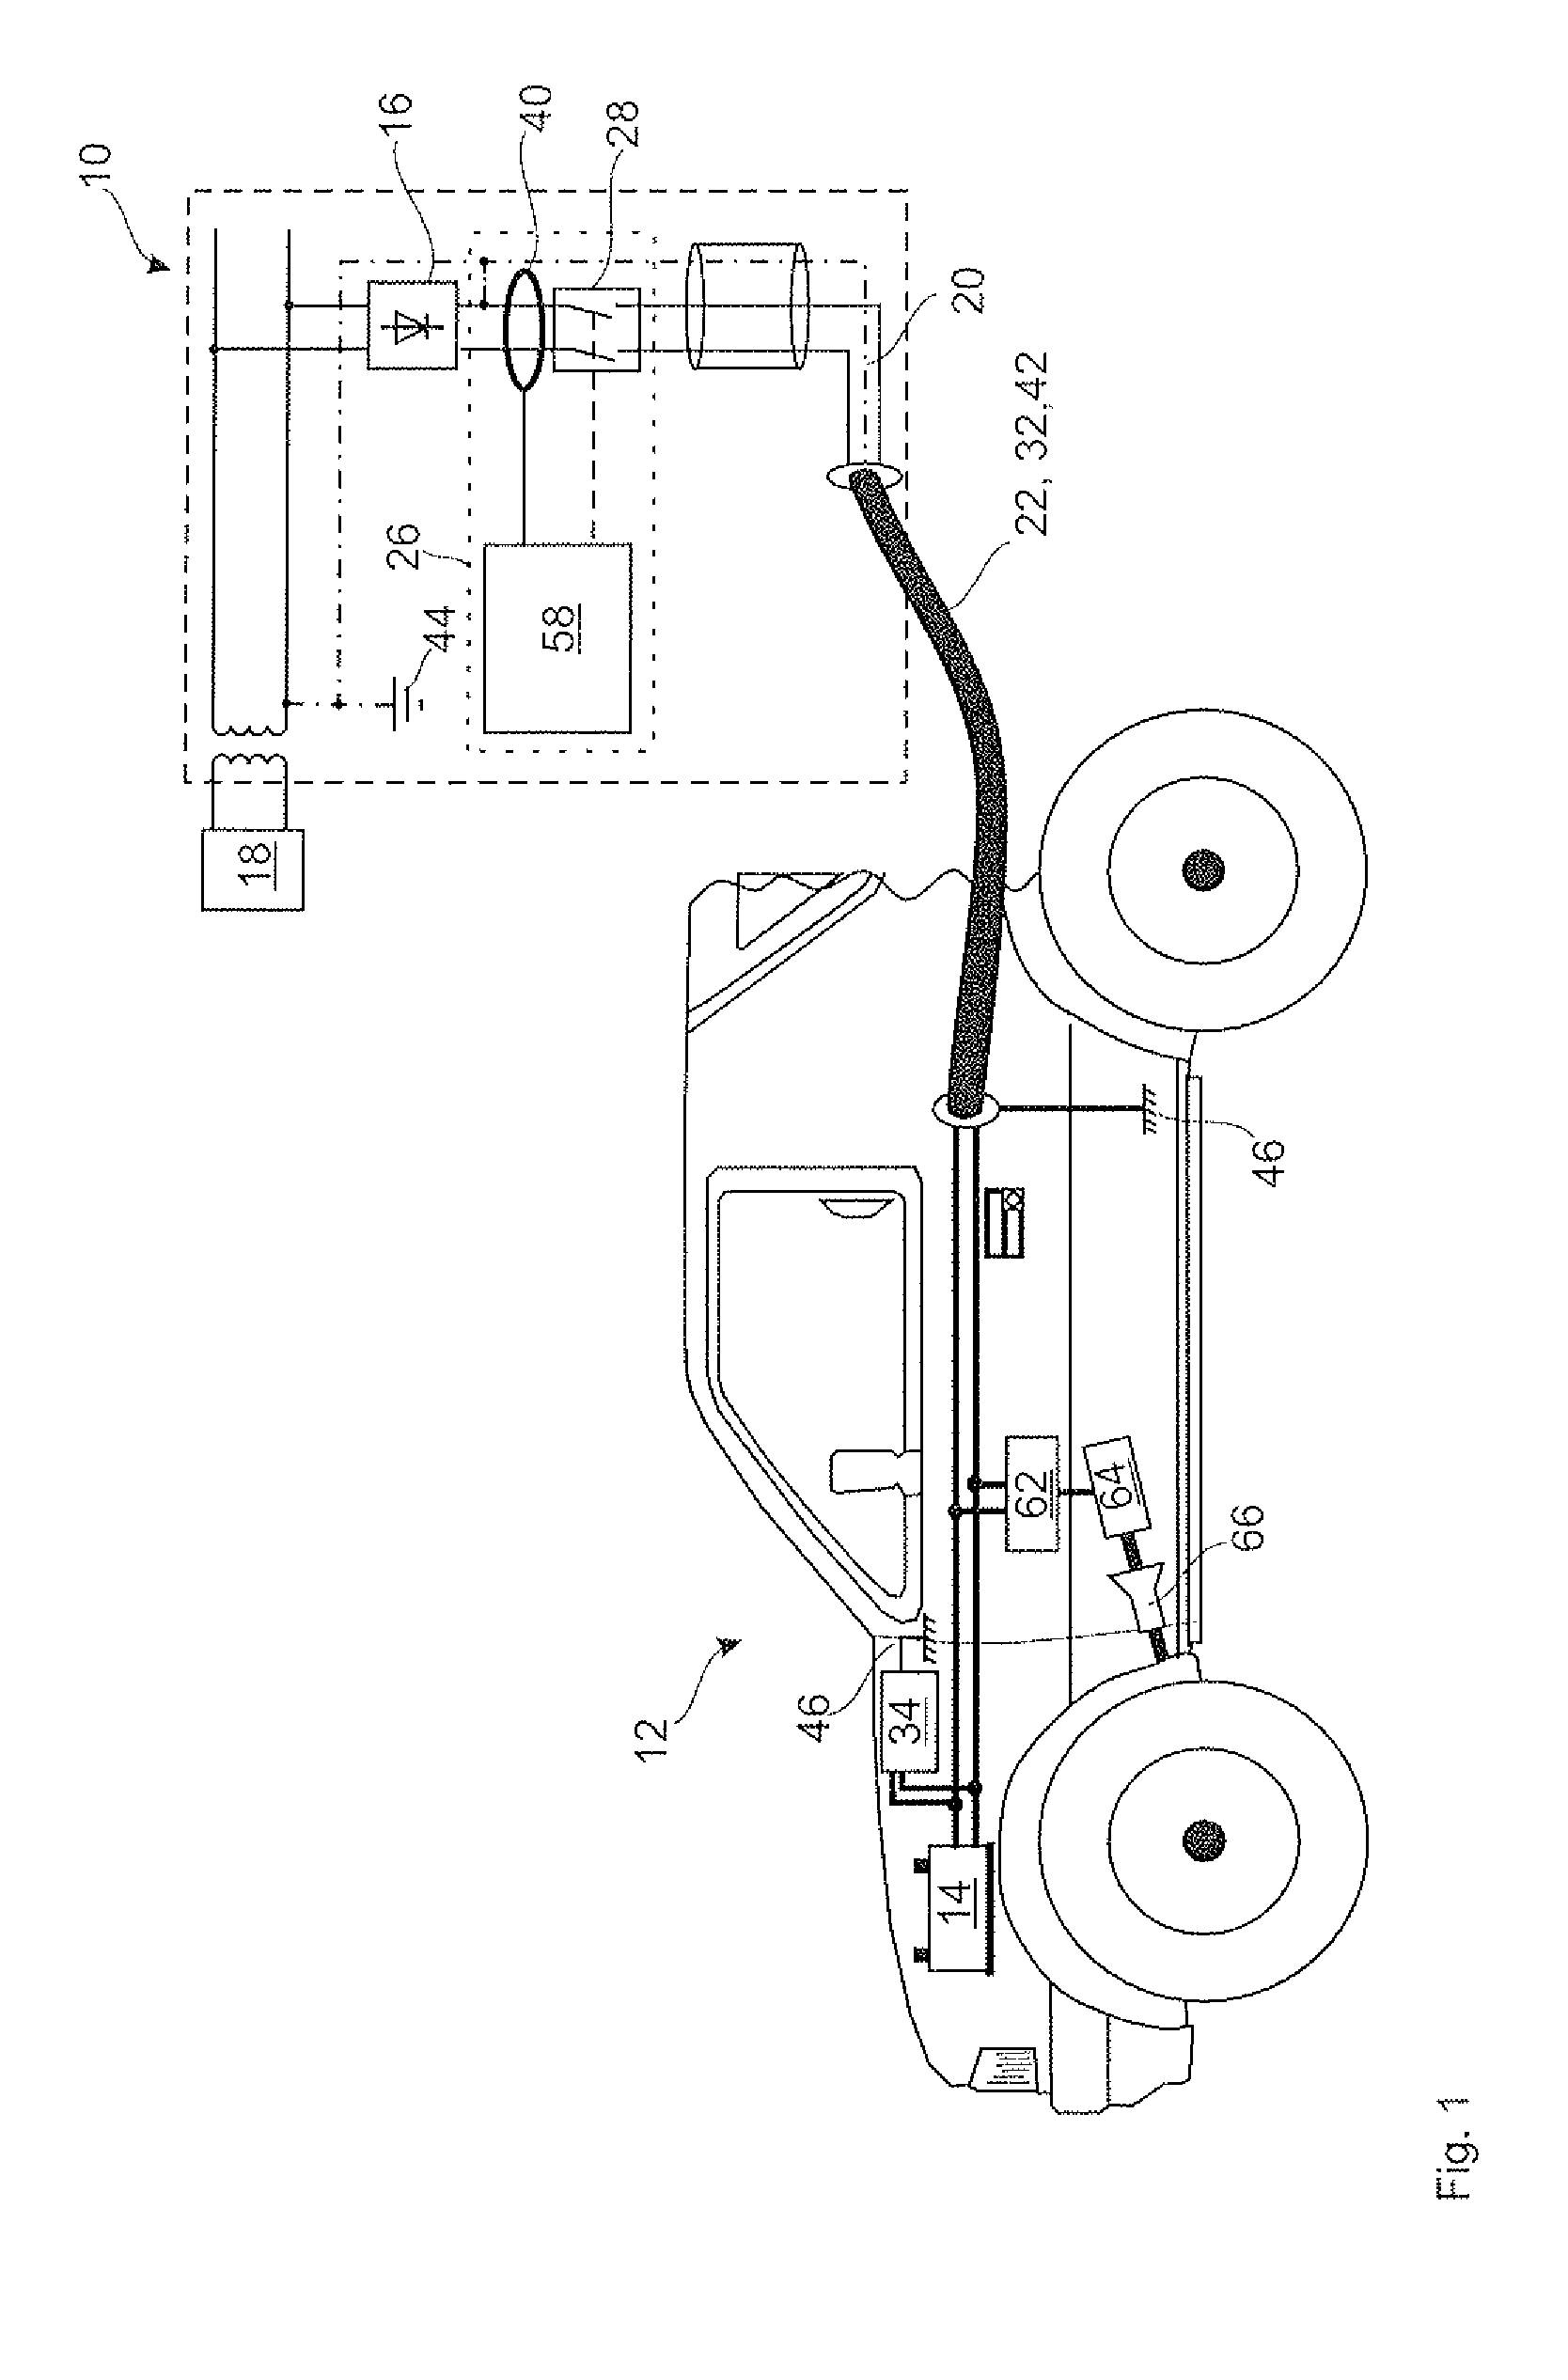 Power charging device for an electric vehicle